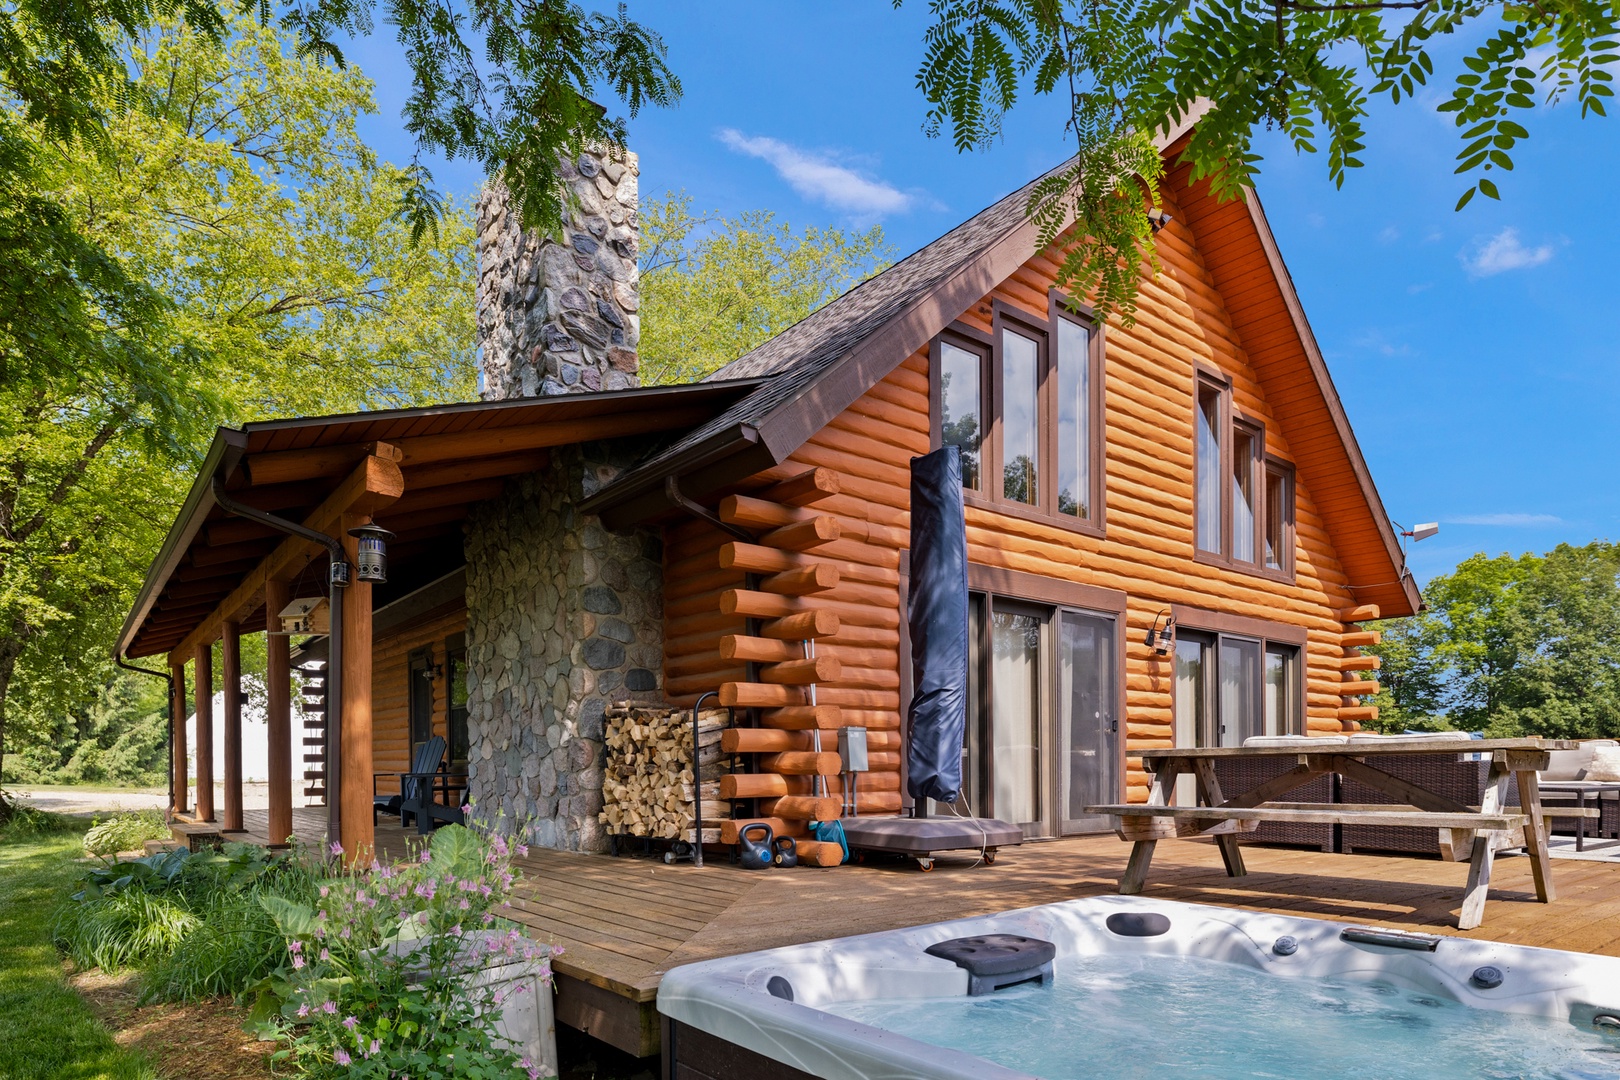 Relax on Scout’s Haven’s outside deck, complete with an in-ground hot tub.